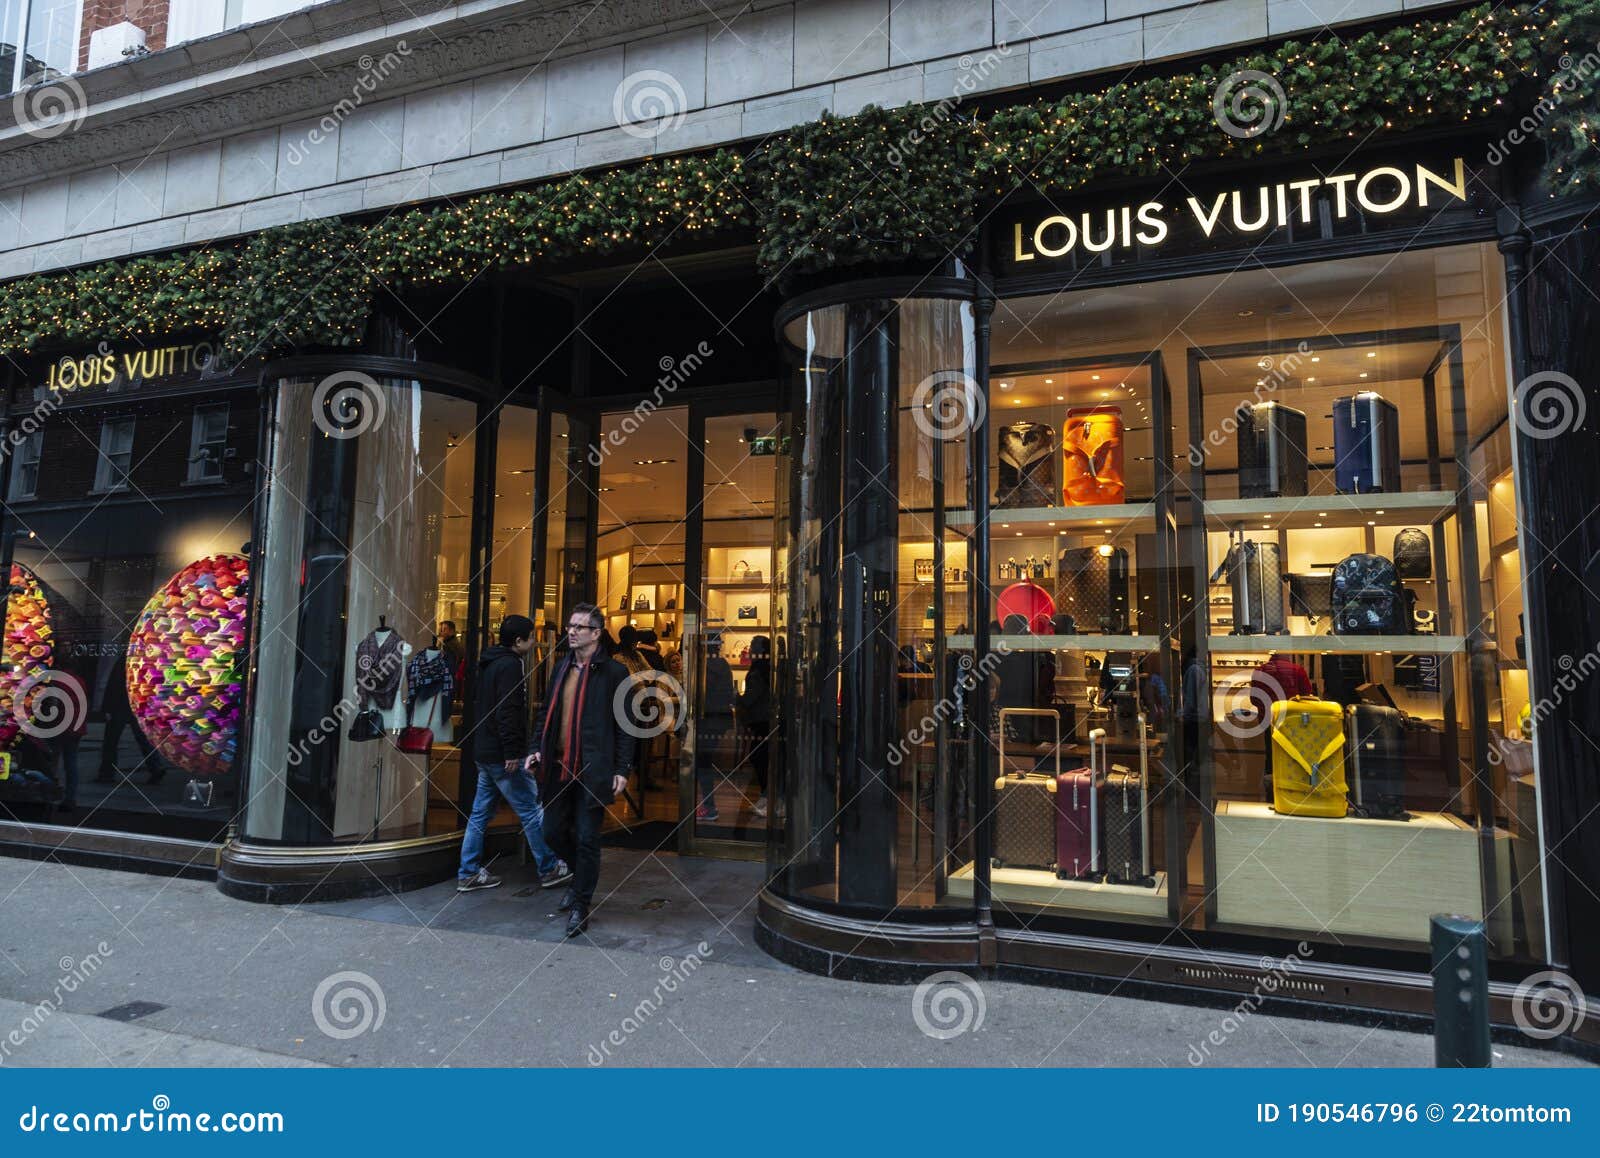 Louis Vuitton store ChampsElysees  Basic facts